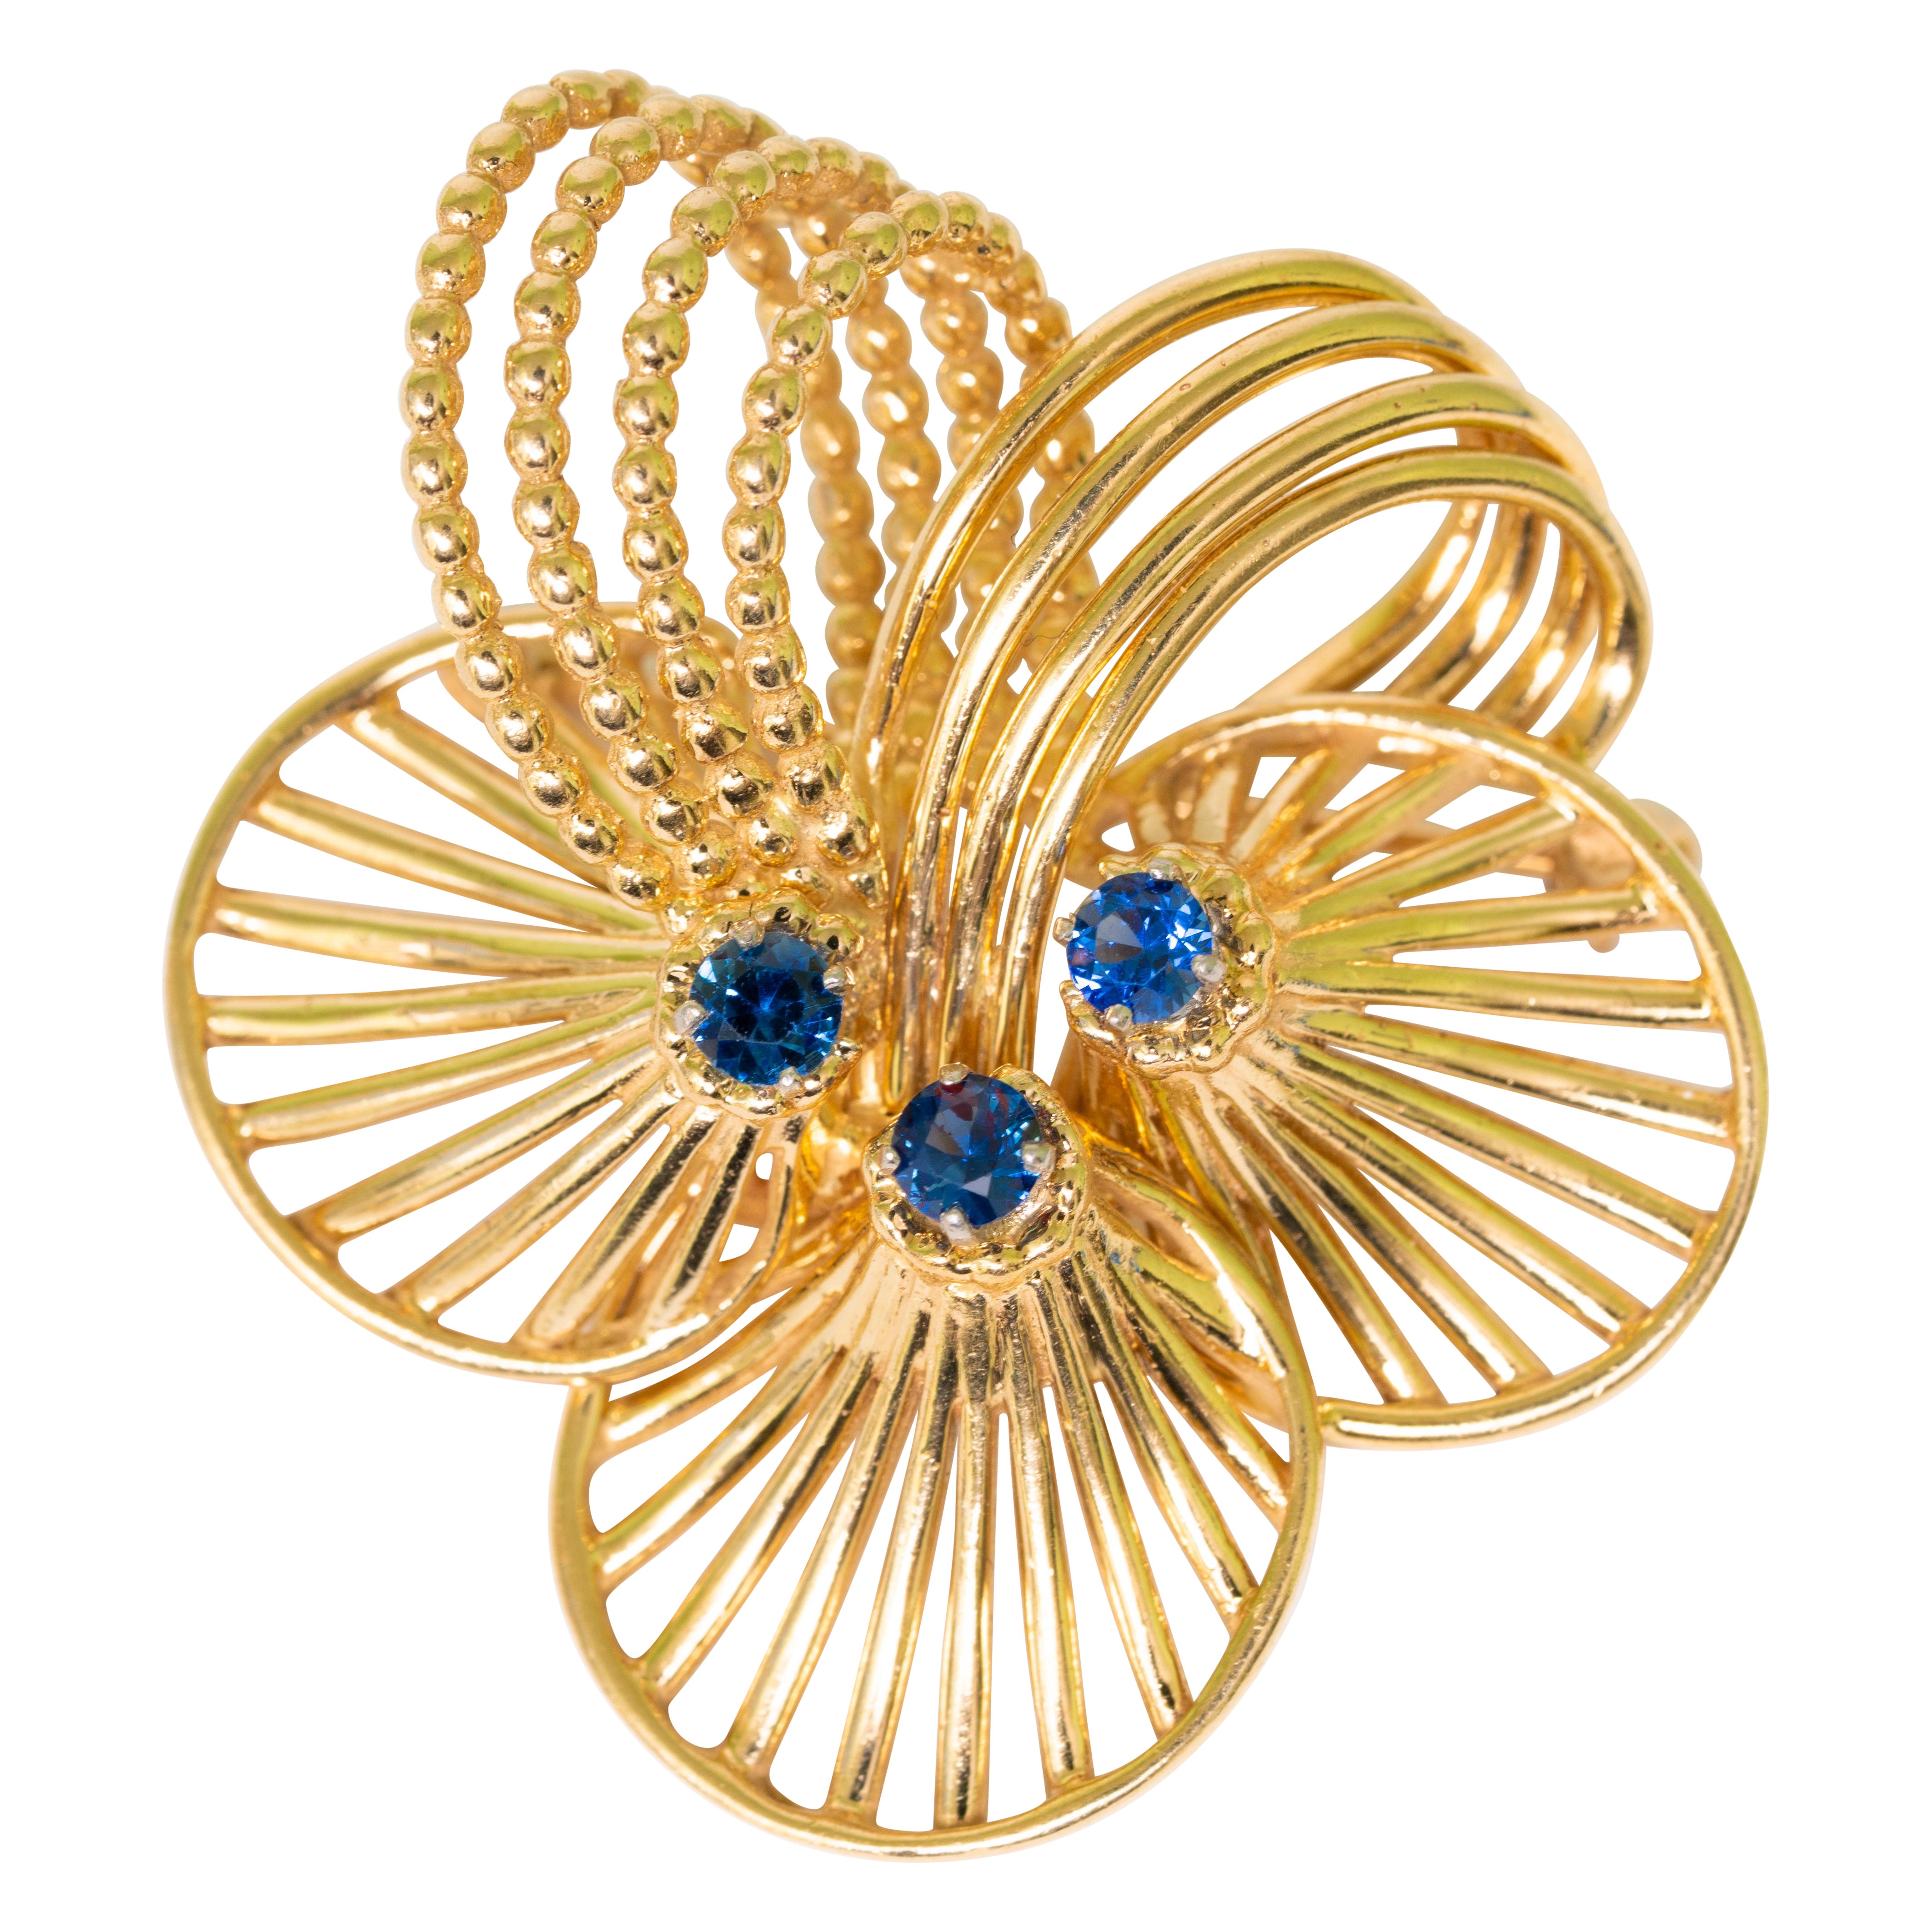 Tiffany & Co Signed 14K Gold and Sapphire Brooch